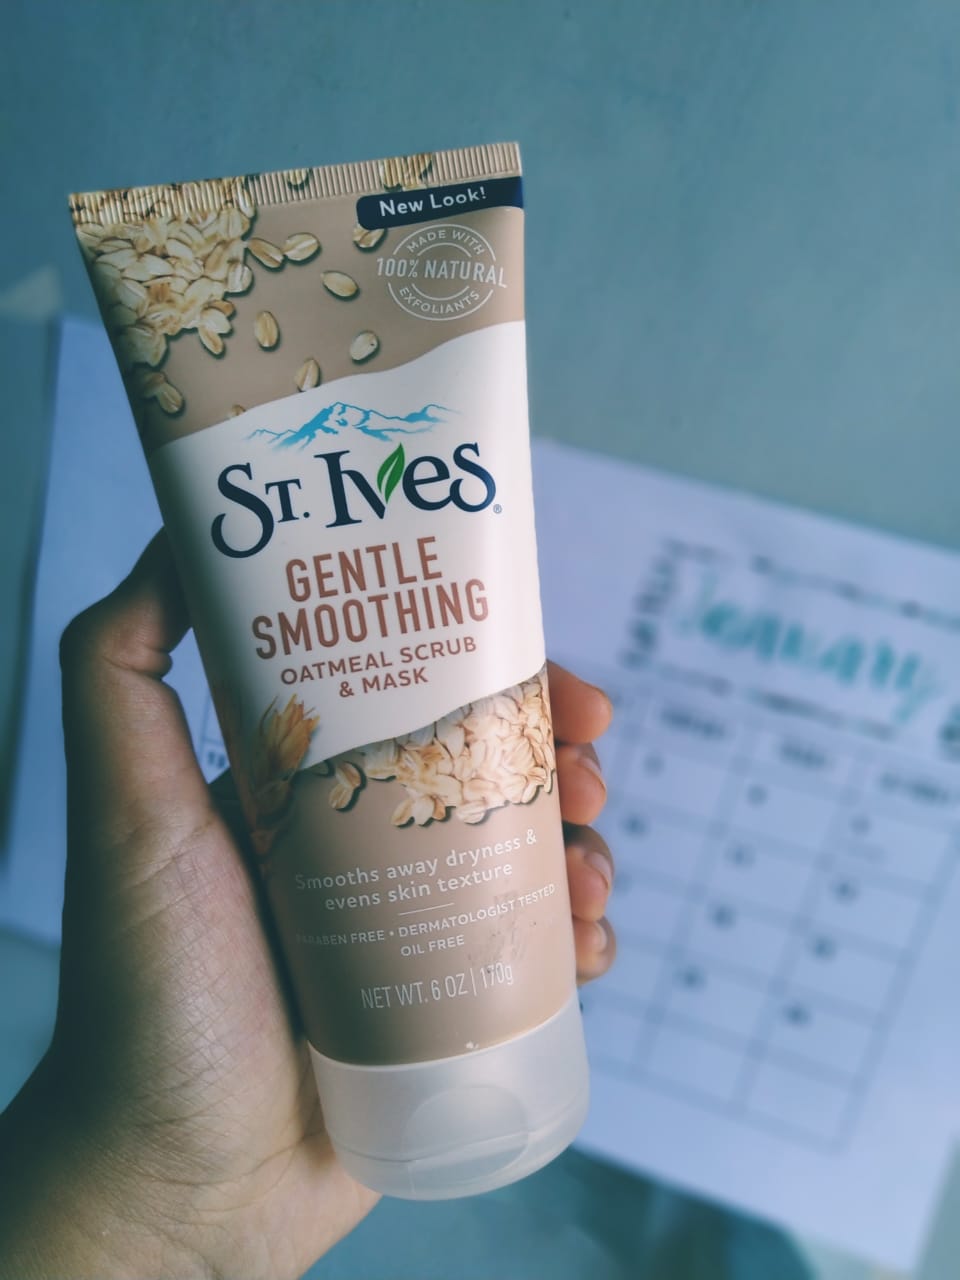 St Ives Gentle Smoothing Oatmeal Scrub Review